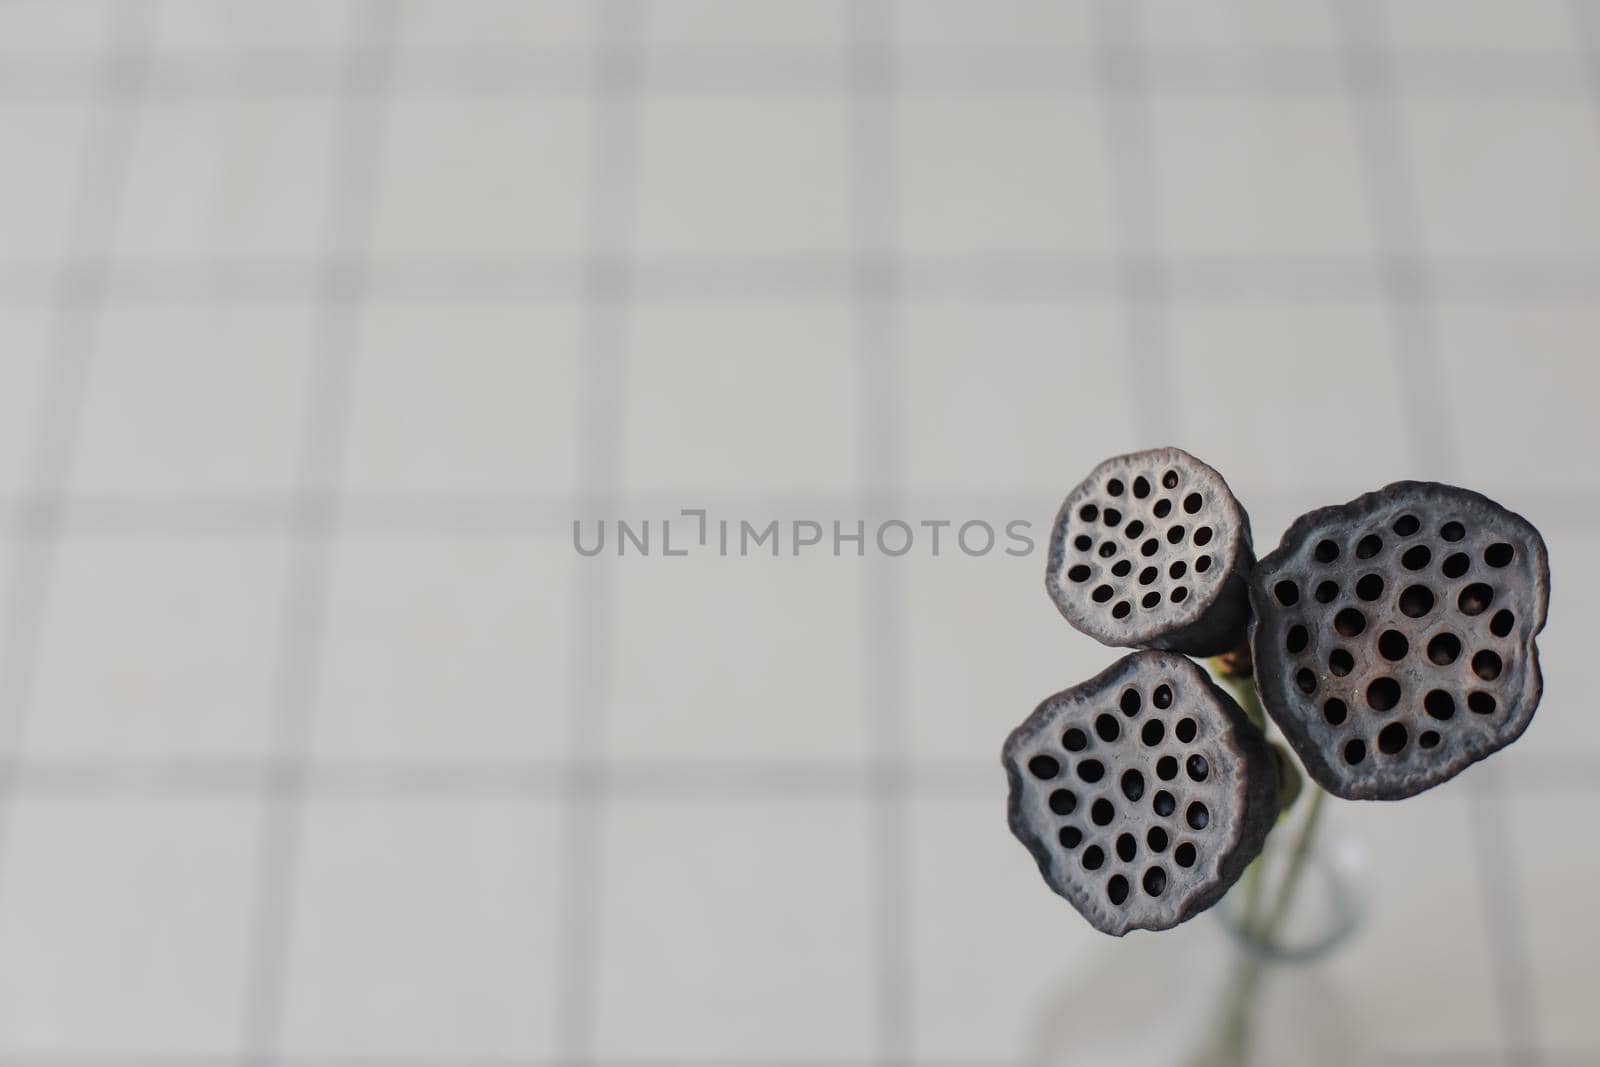 Dried lotus flower seed pods isolated on white background.